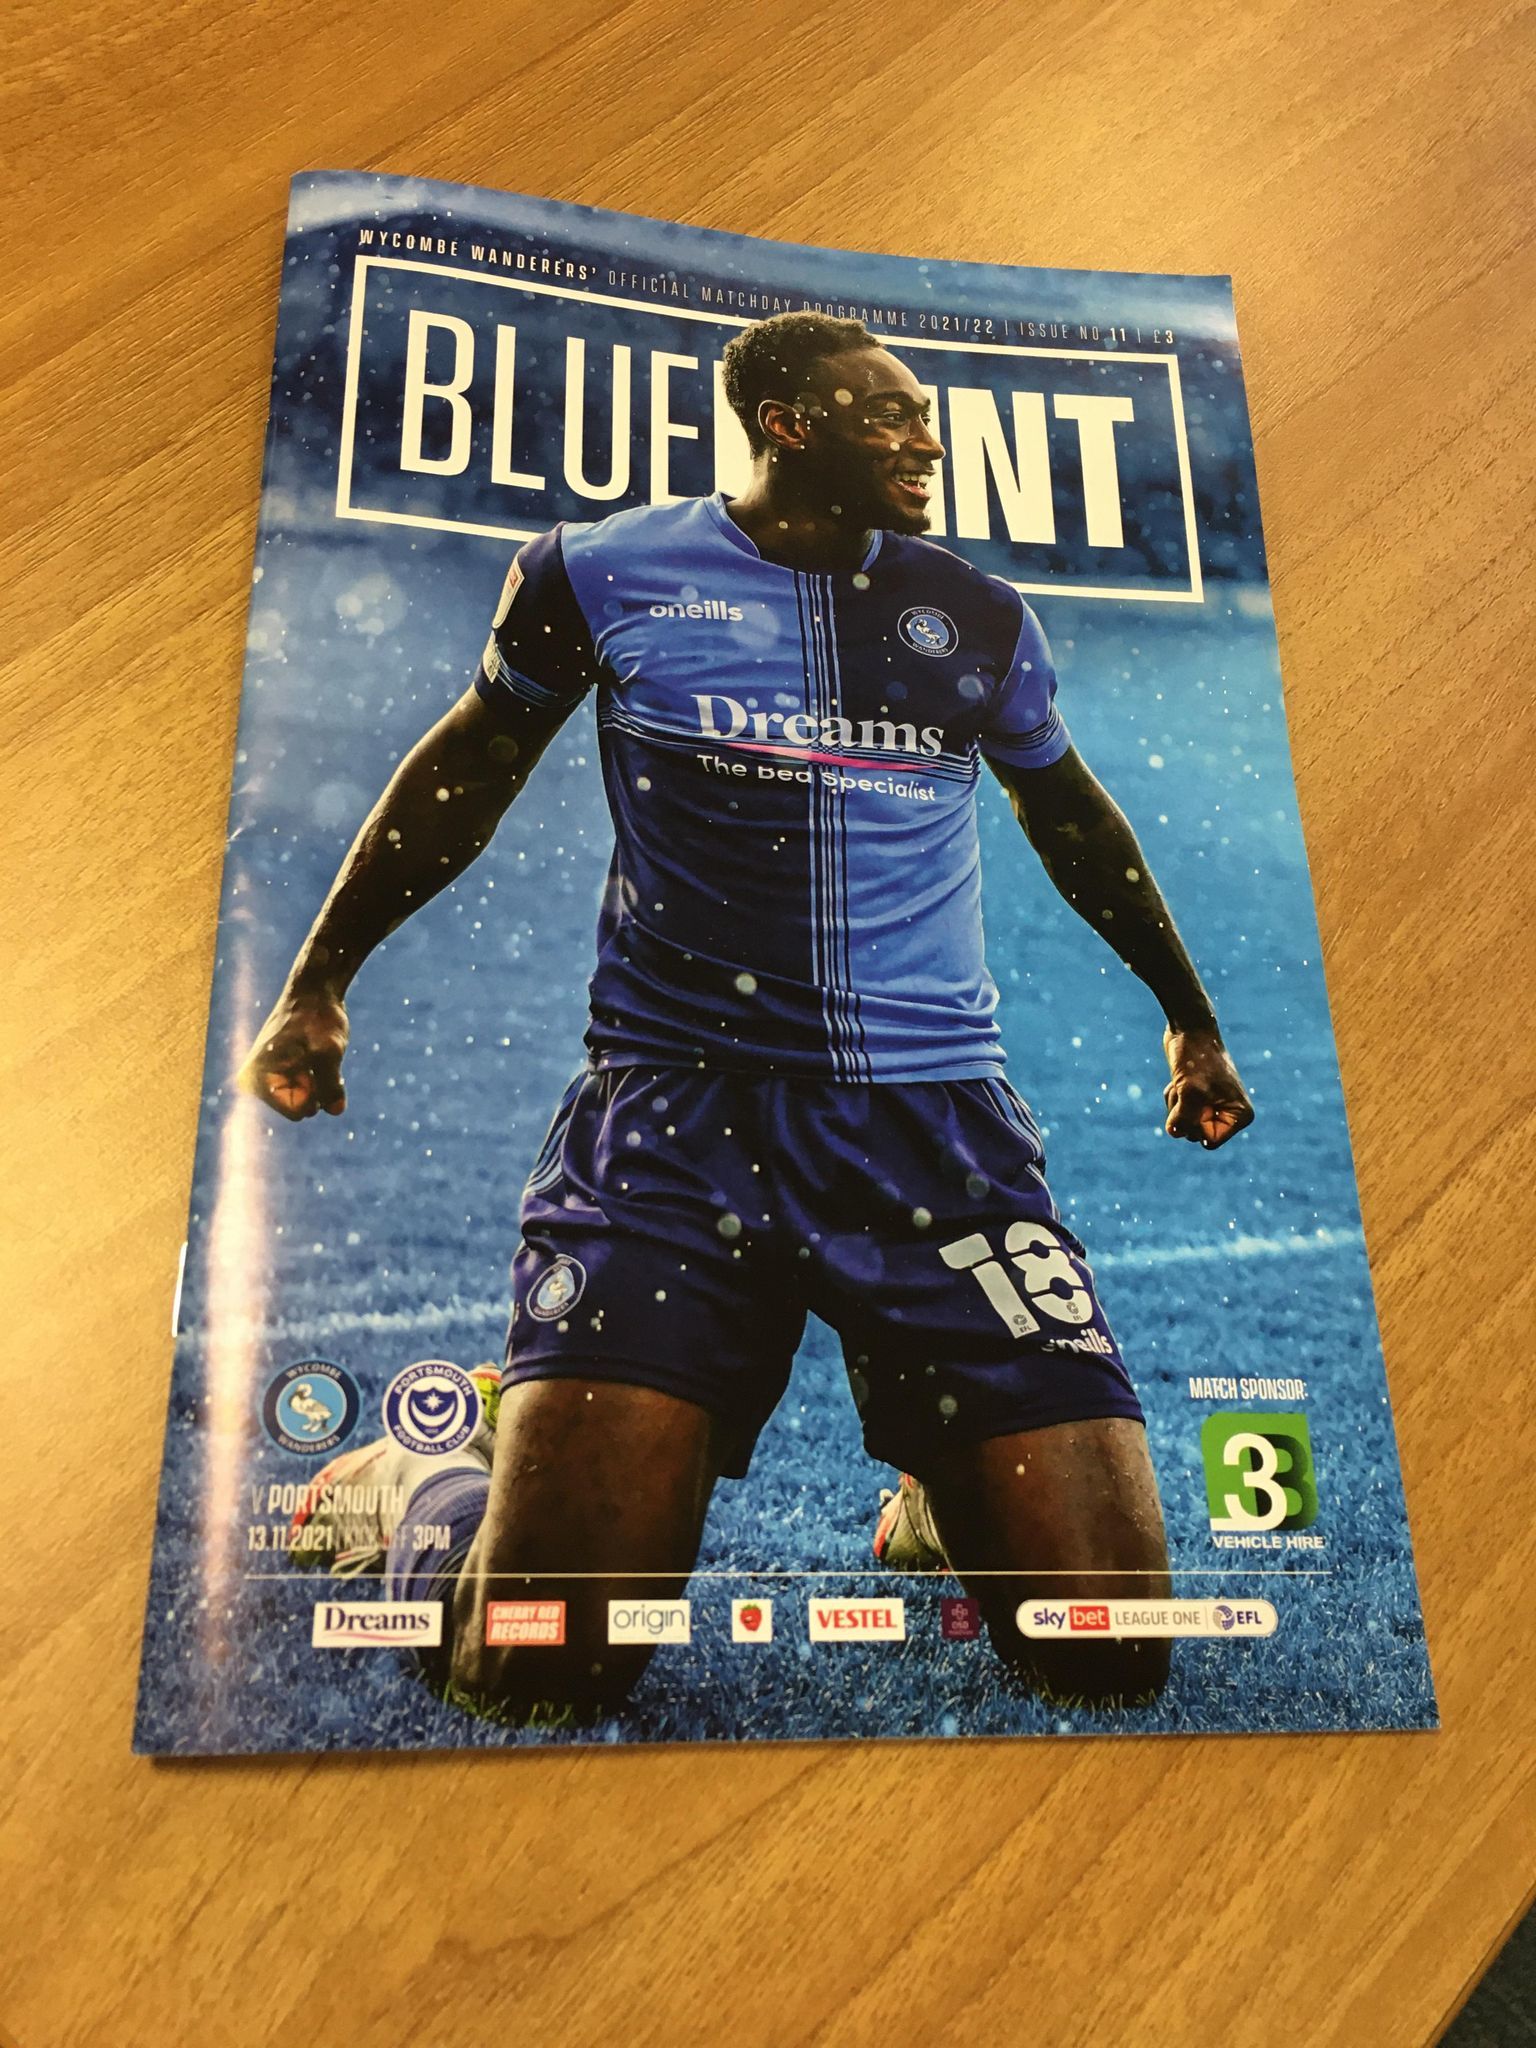 The programme from the Portsmouth match 